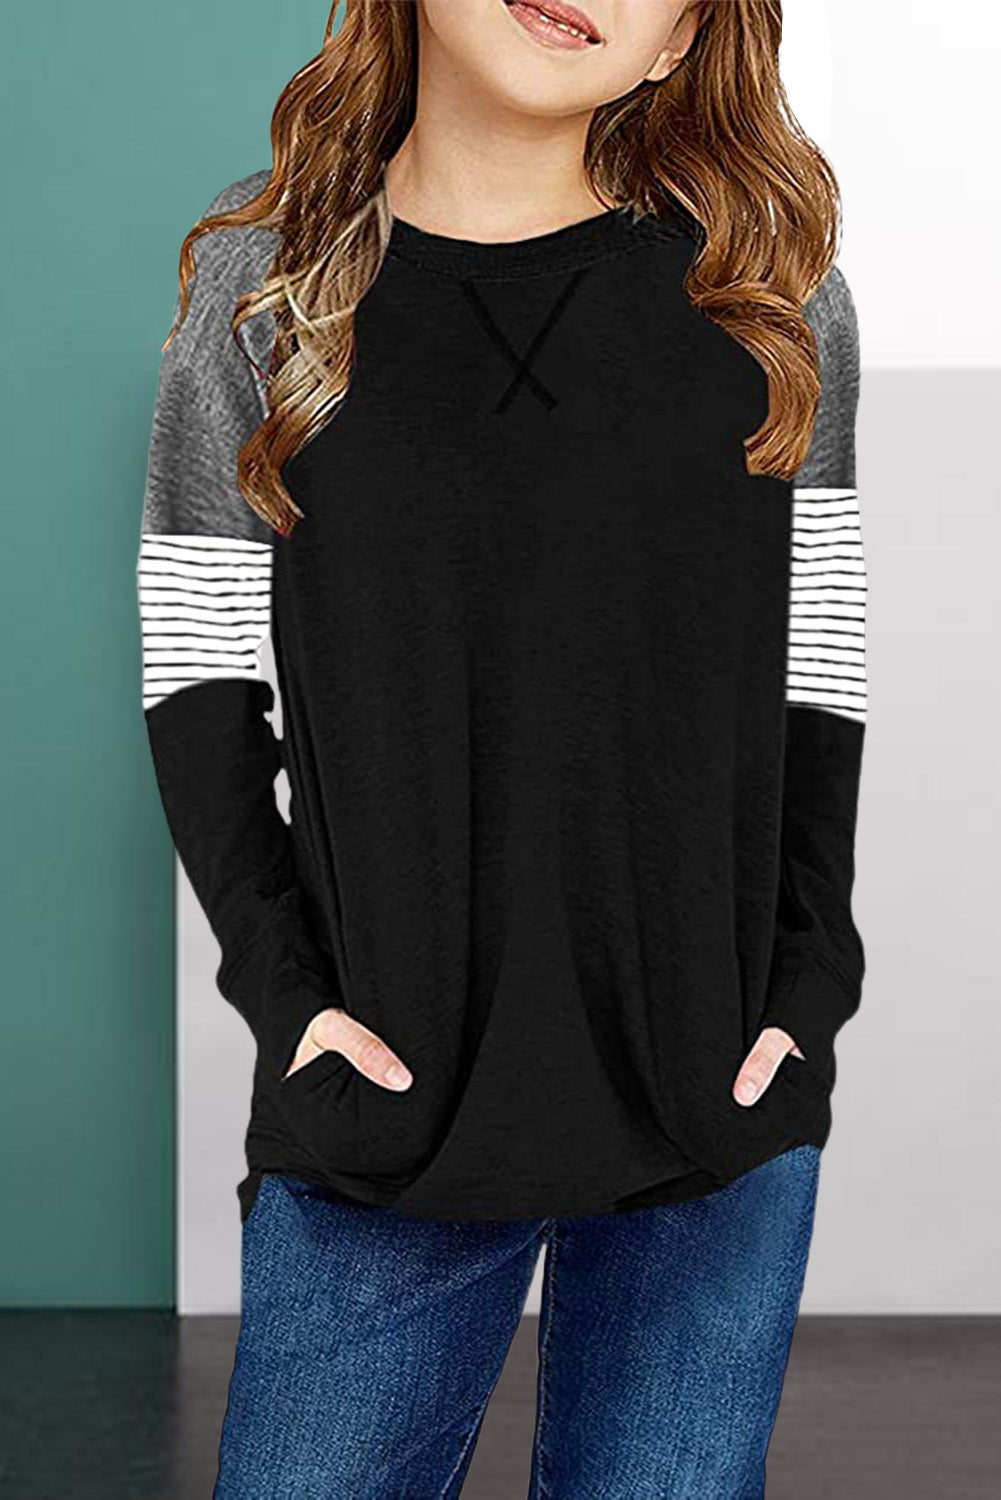 Striped Colorblock Long Sleeve Girls Blouse with Pocket